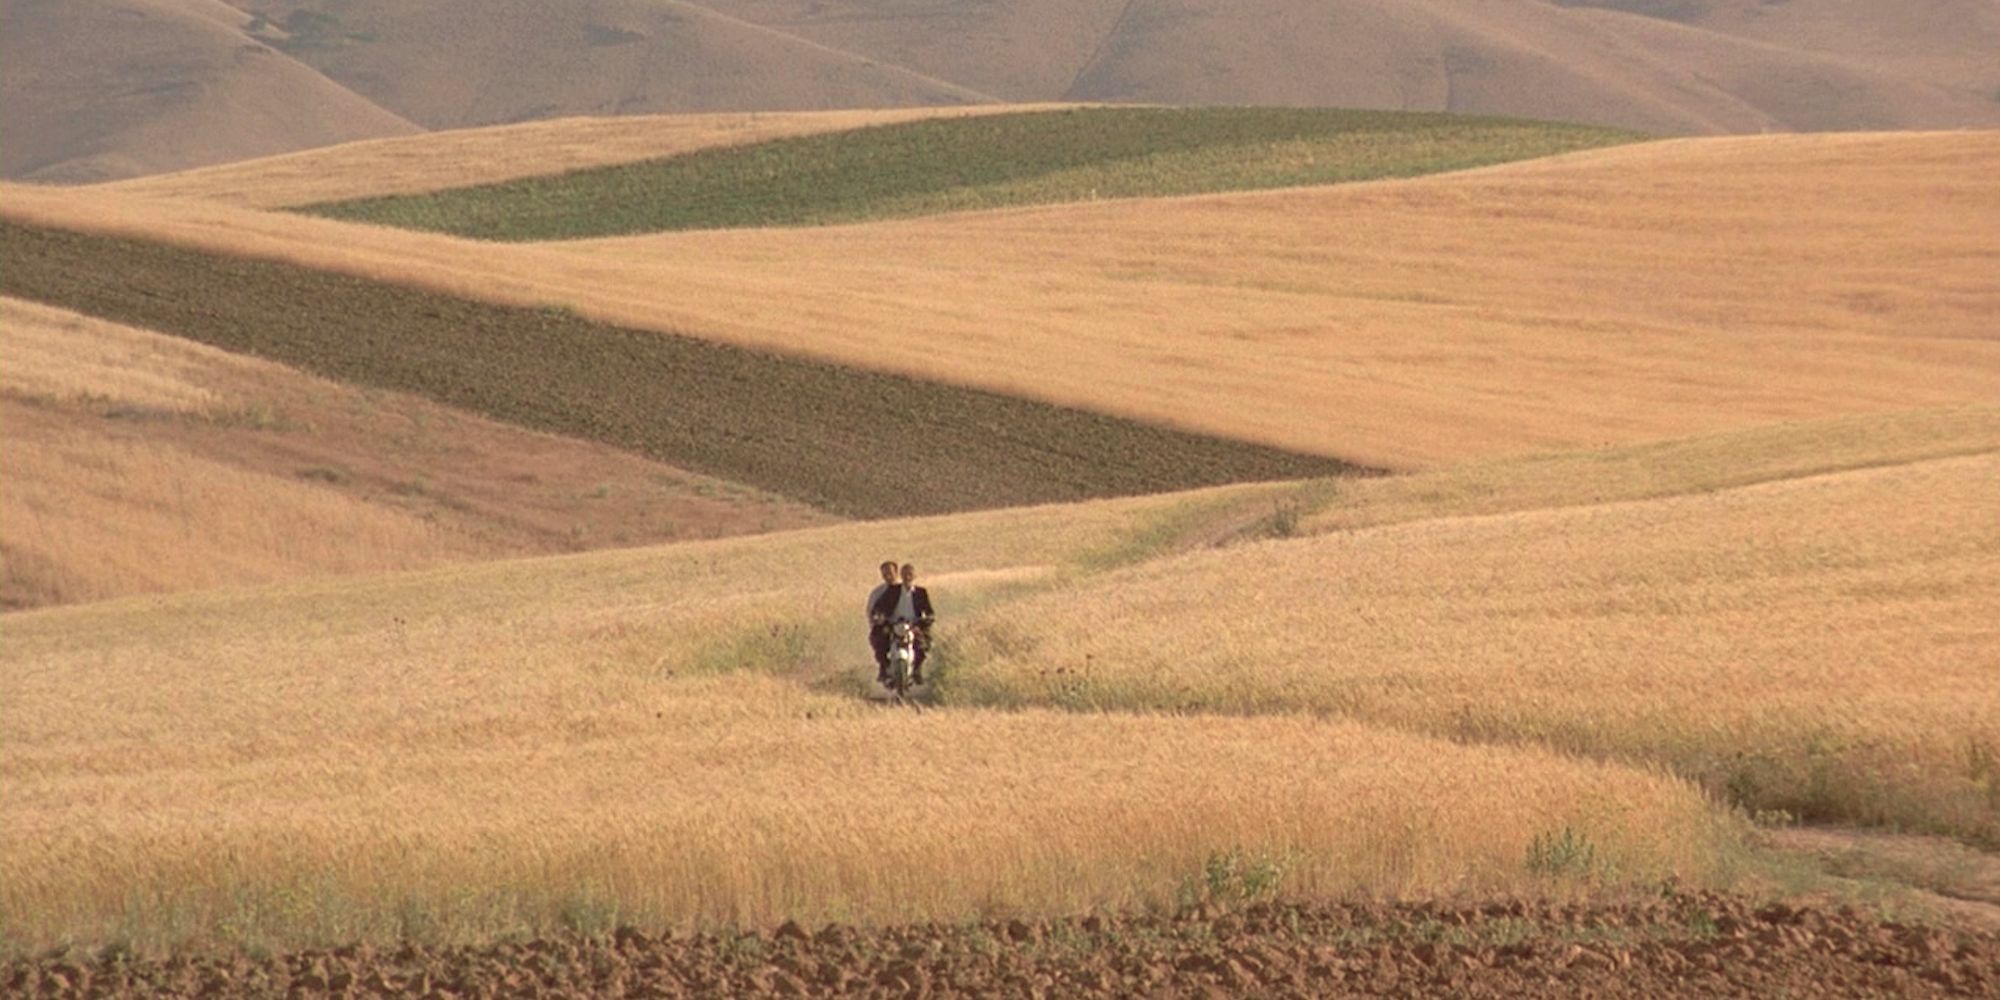 Two figures ride a motorcycle across a wheat field in The Wind Will Carry Us